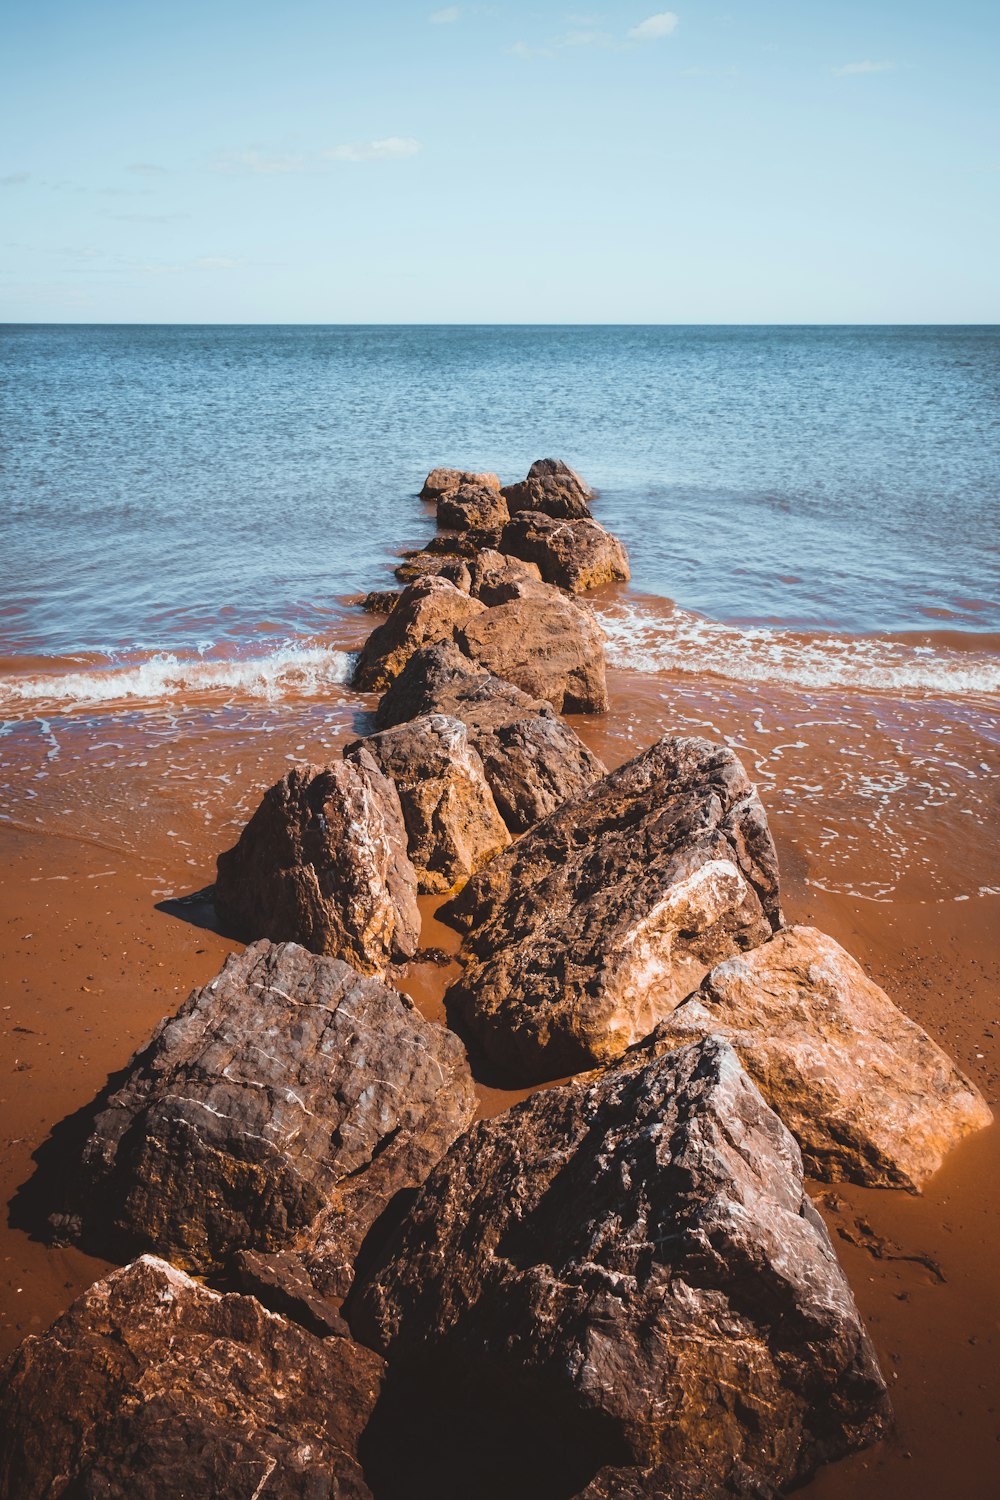 brown and gray rock formation near body of water during daytime